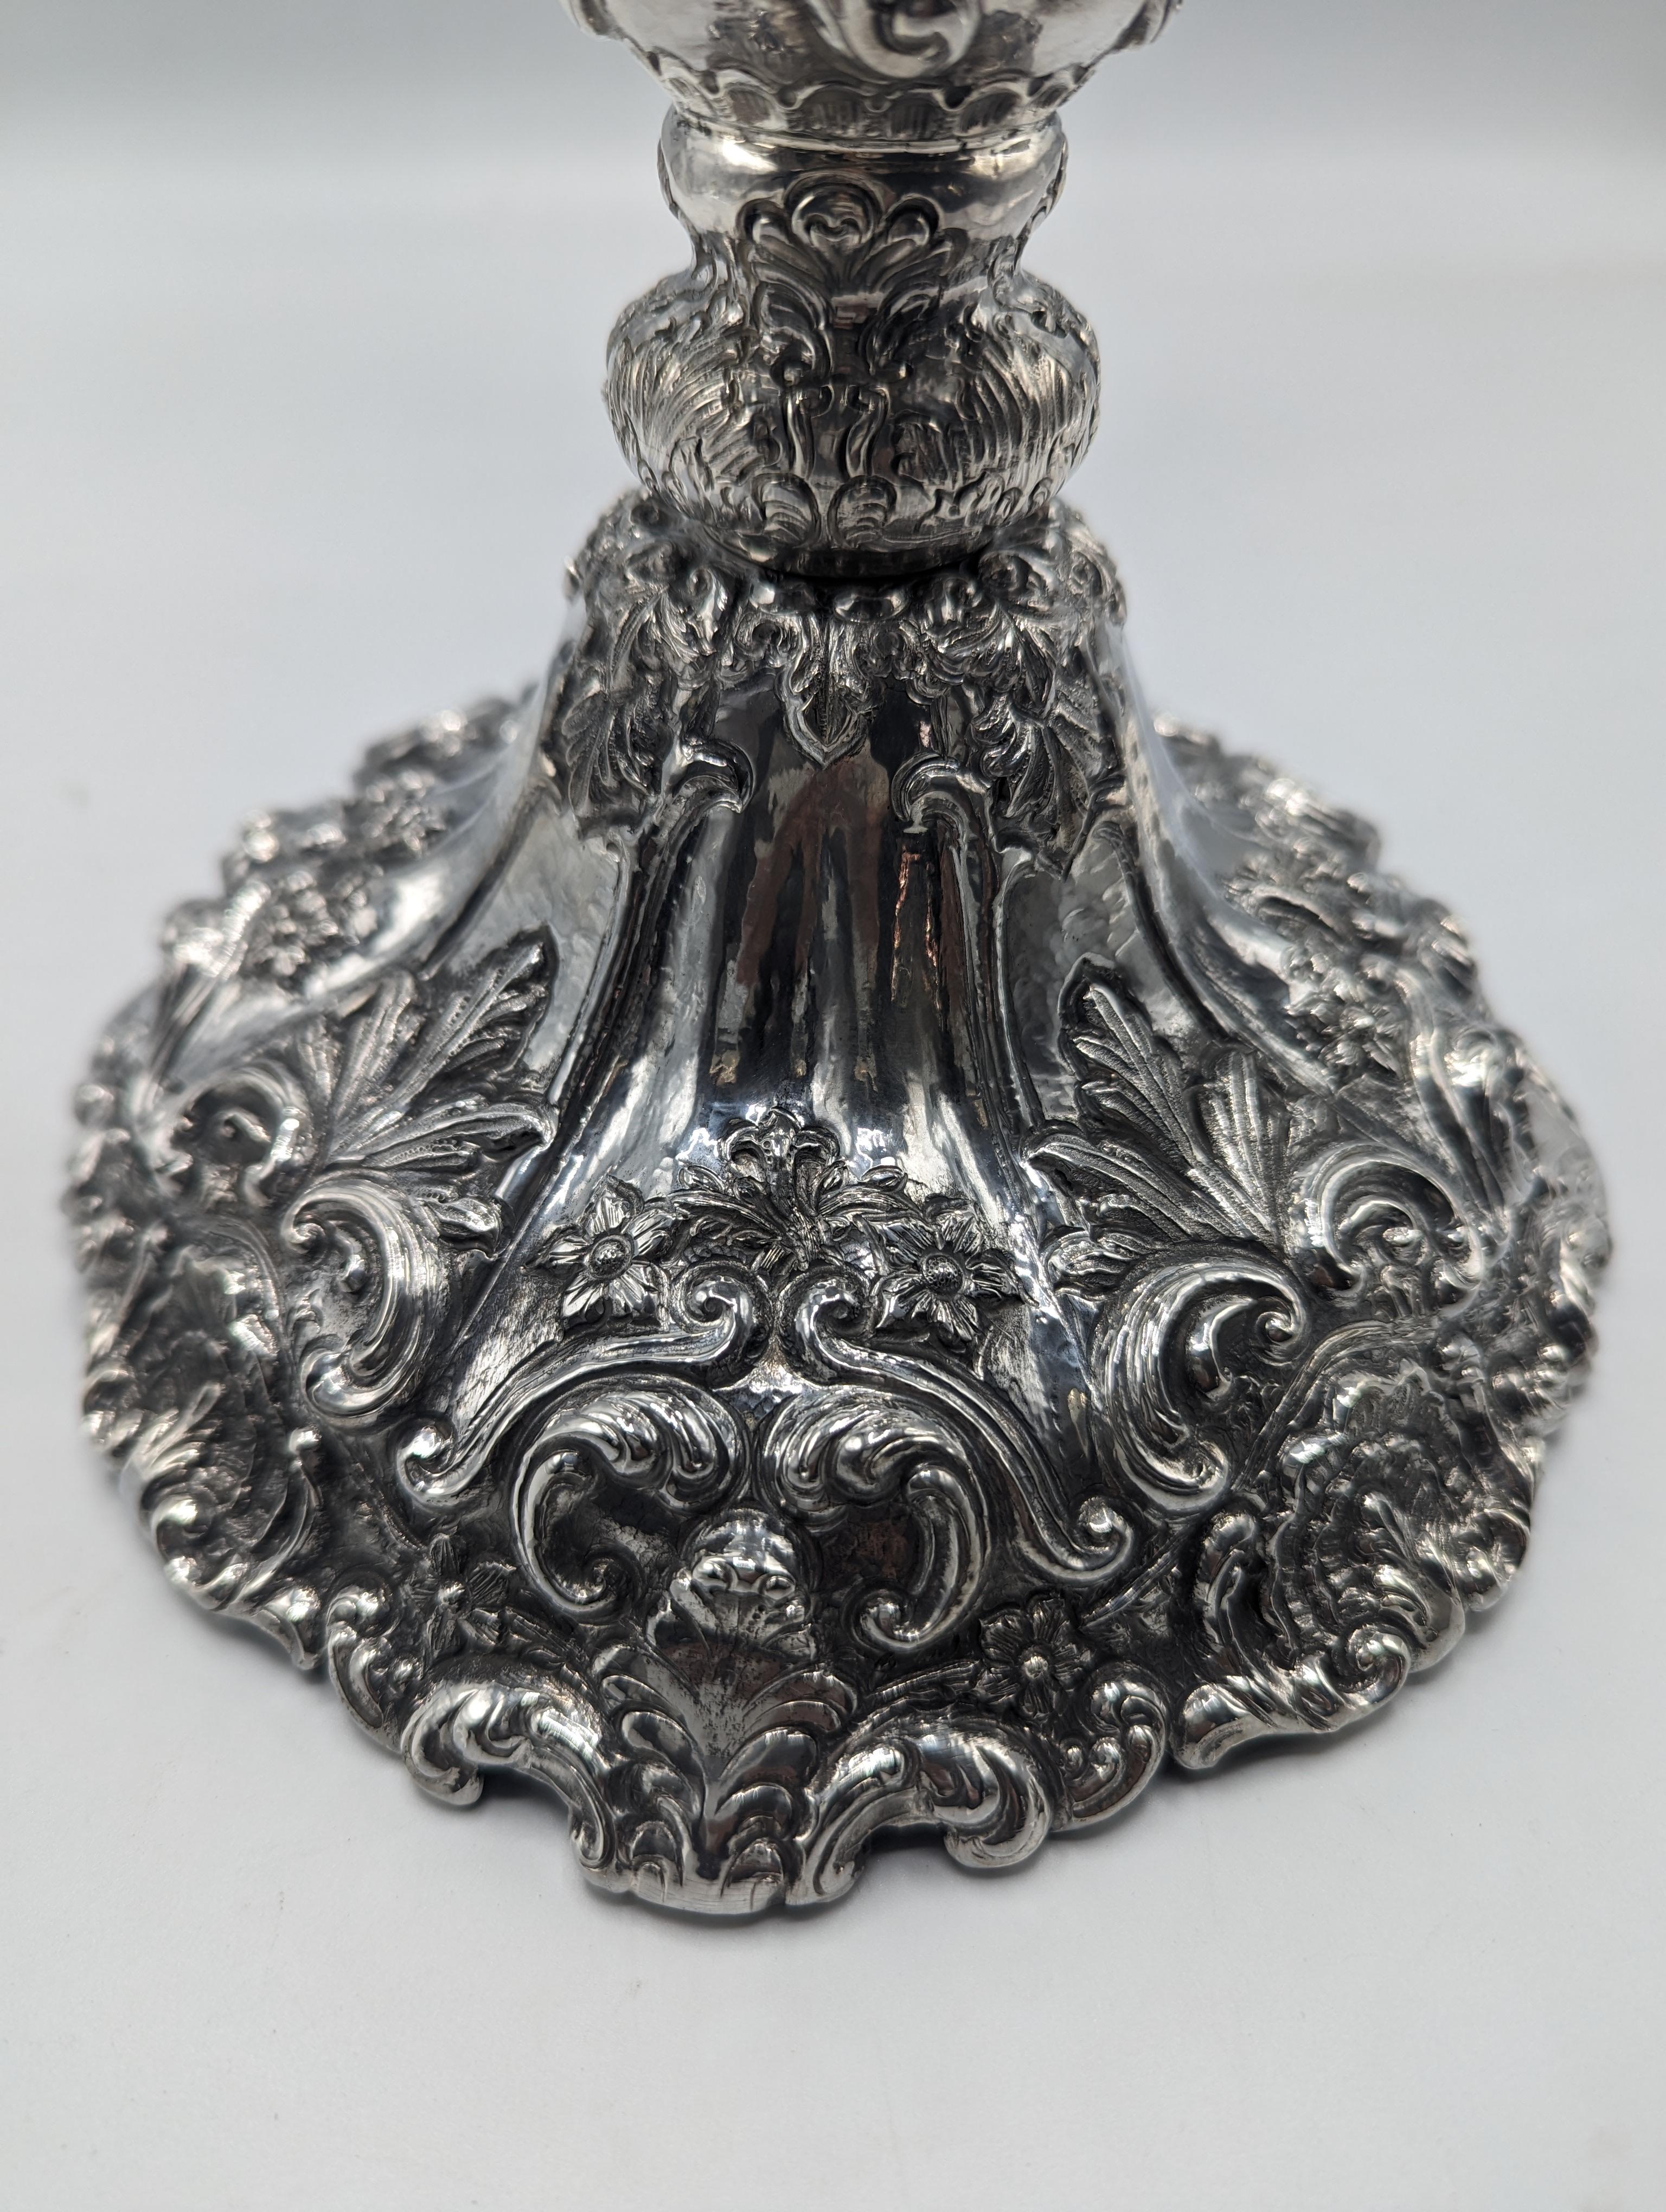 Handcrafted Sterling Silver Candelabra. Each part has been thoroughly embossed with the same tools used for hundreds of years by Bolivian silversmiths. This is a form of art that may come to disappear in time. In an age of mass production, handmade